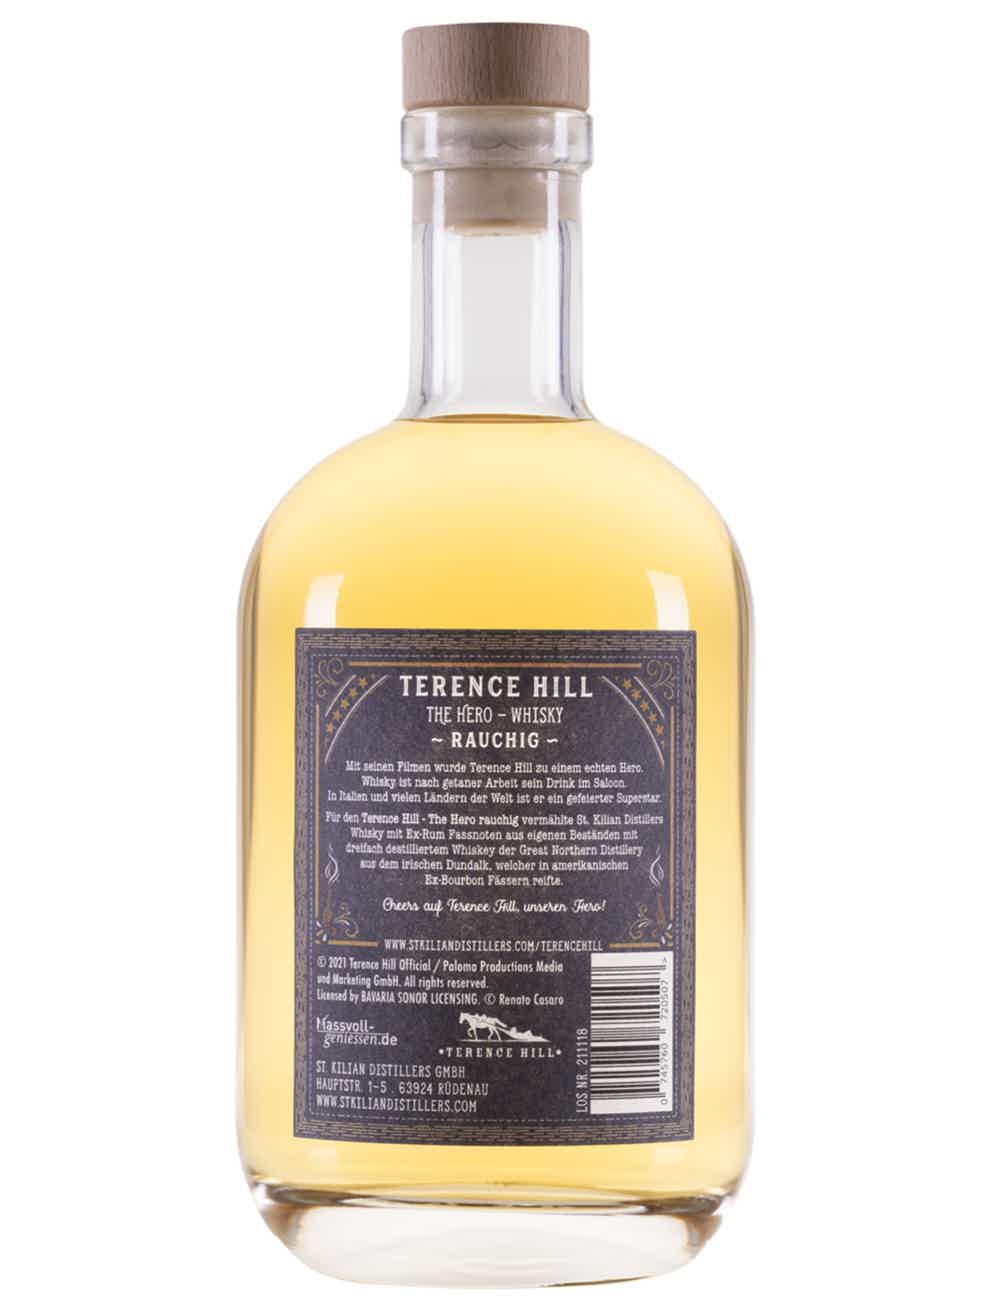 Terence Hill - The Hero - Whisky (Peated) 49.0% 0.7L, Spirits